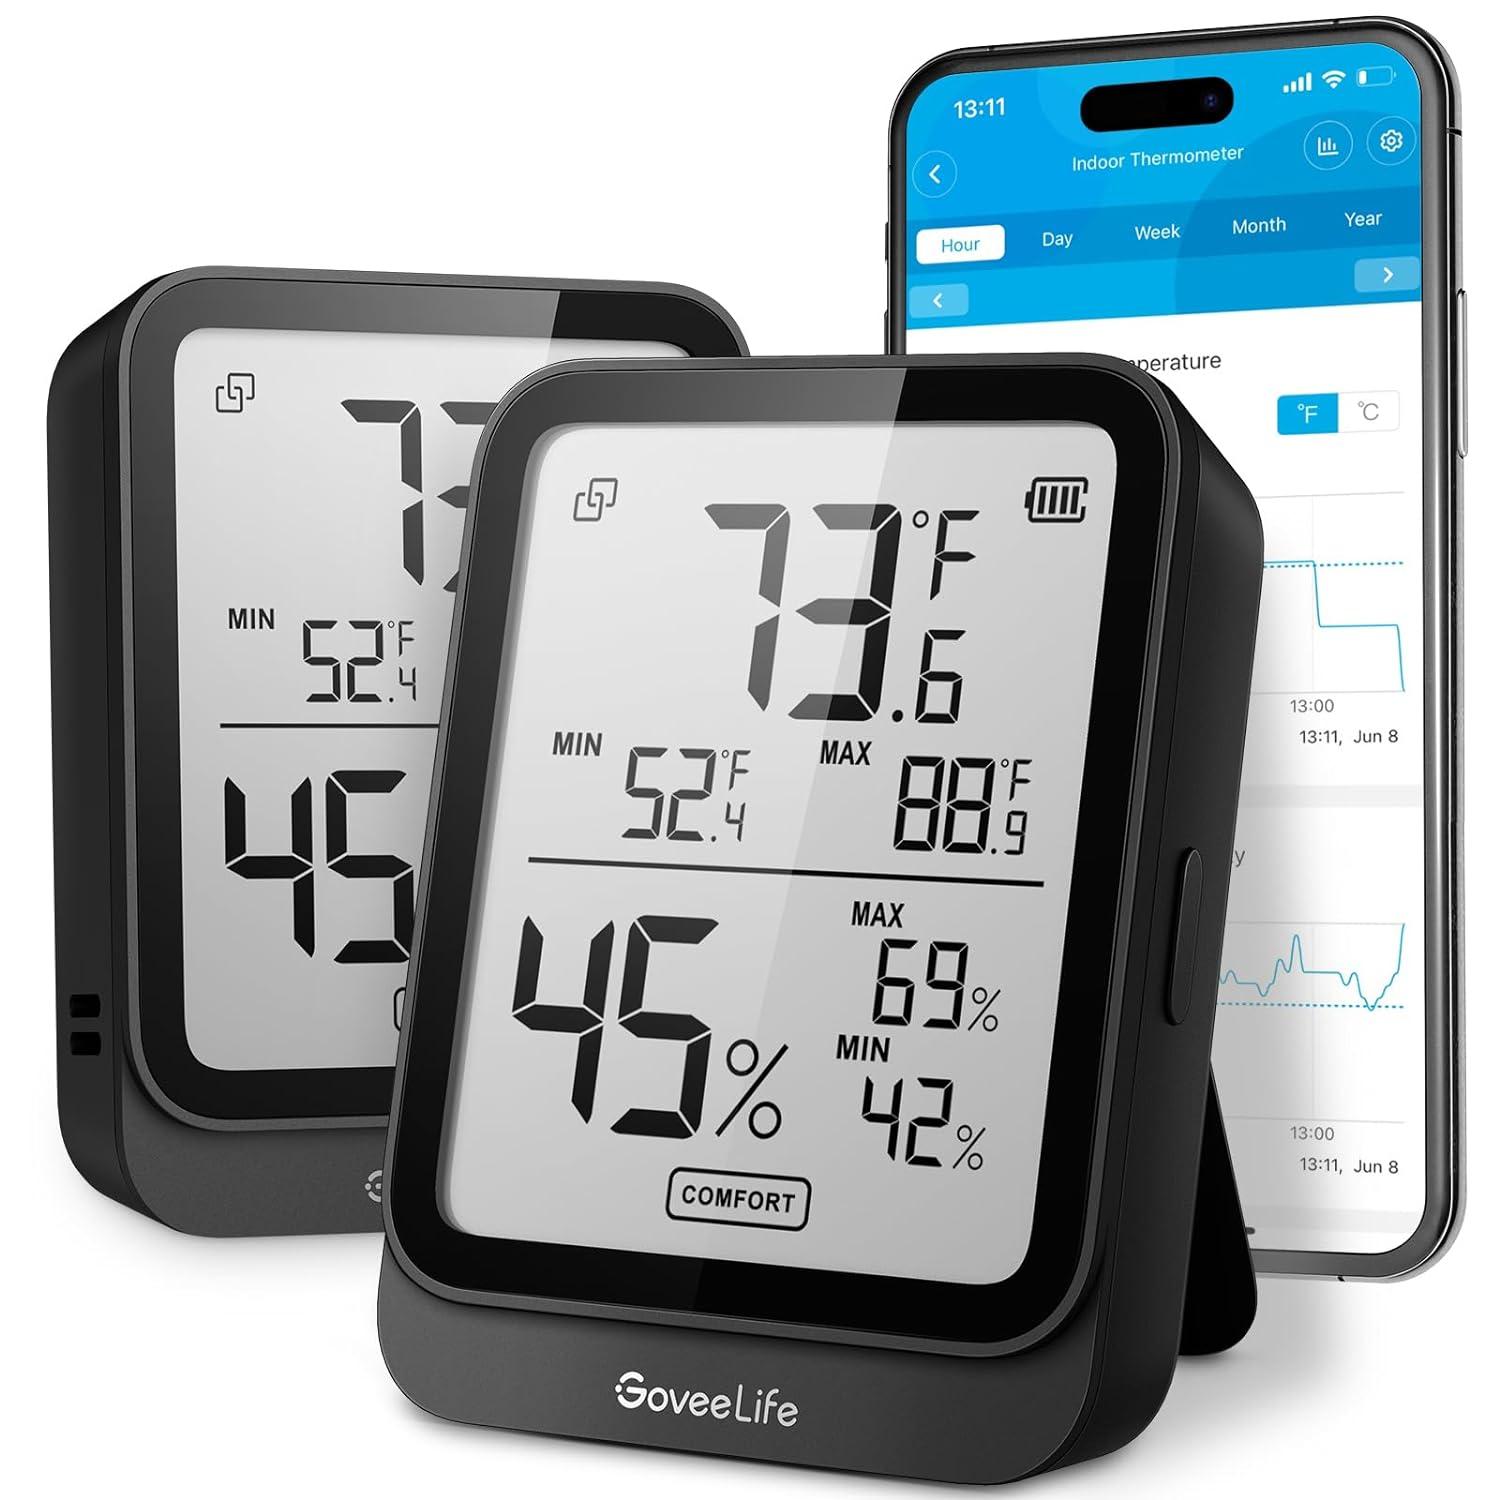 GoveeLife Hygrometer Thermometer Room Temperature Monitor 2 Pack for $17.67